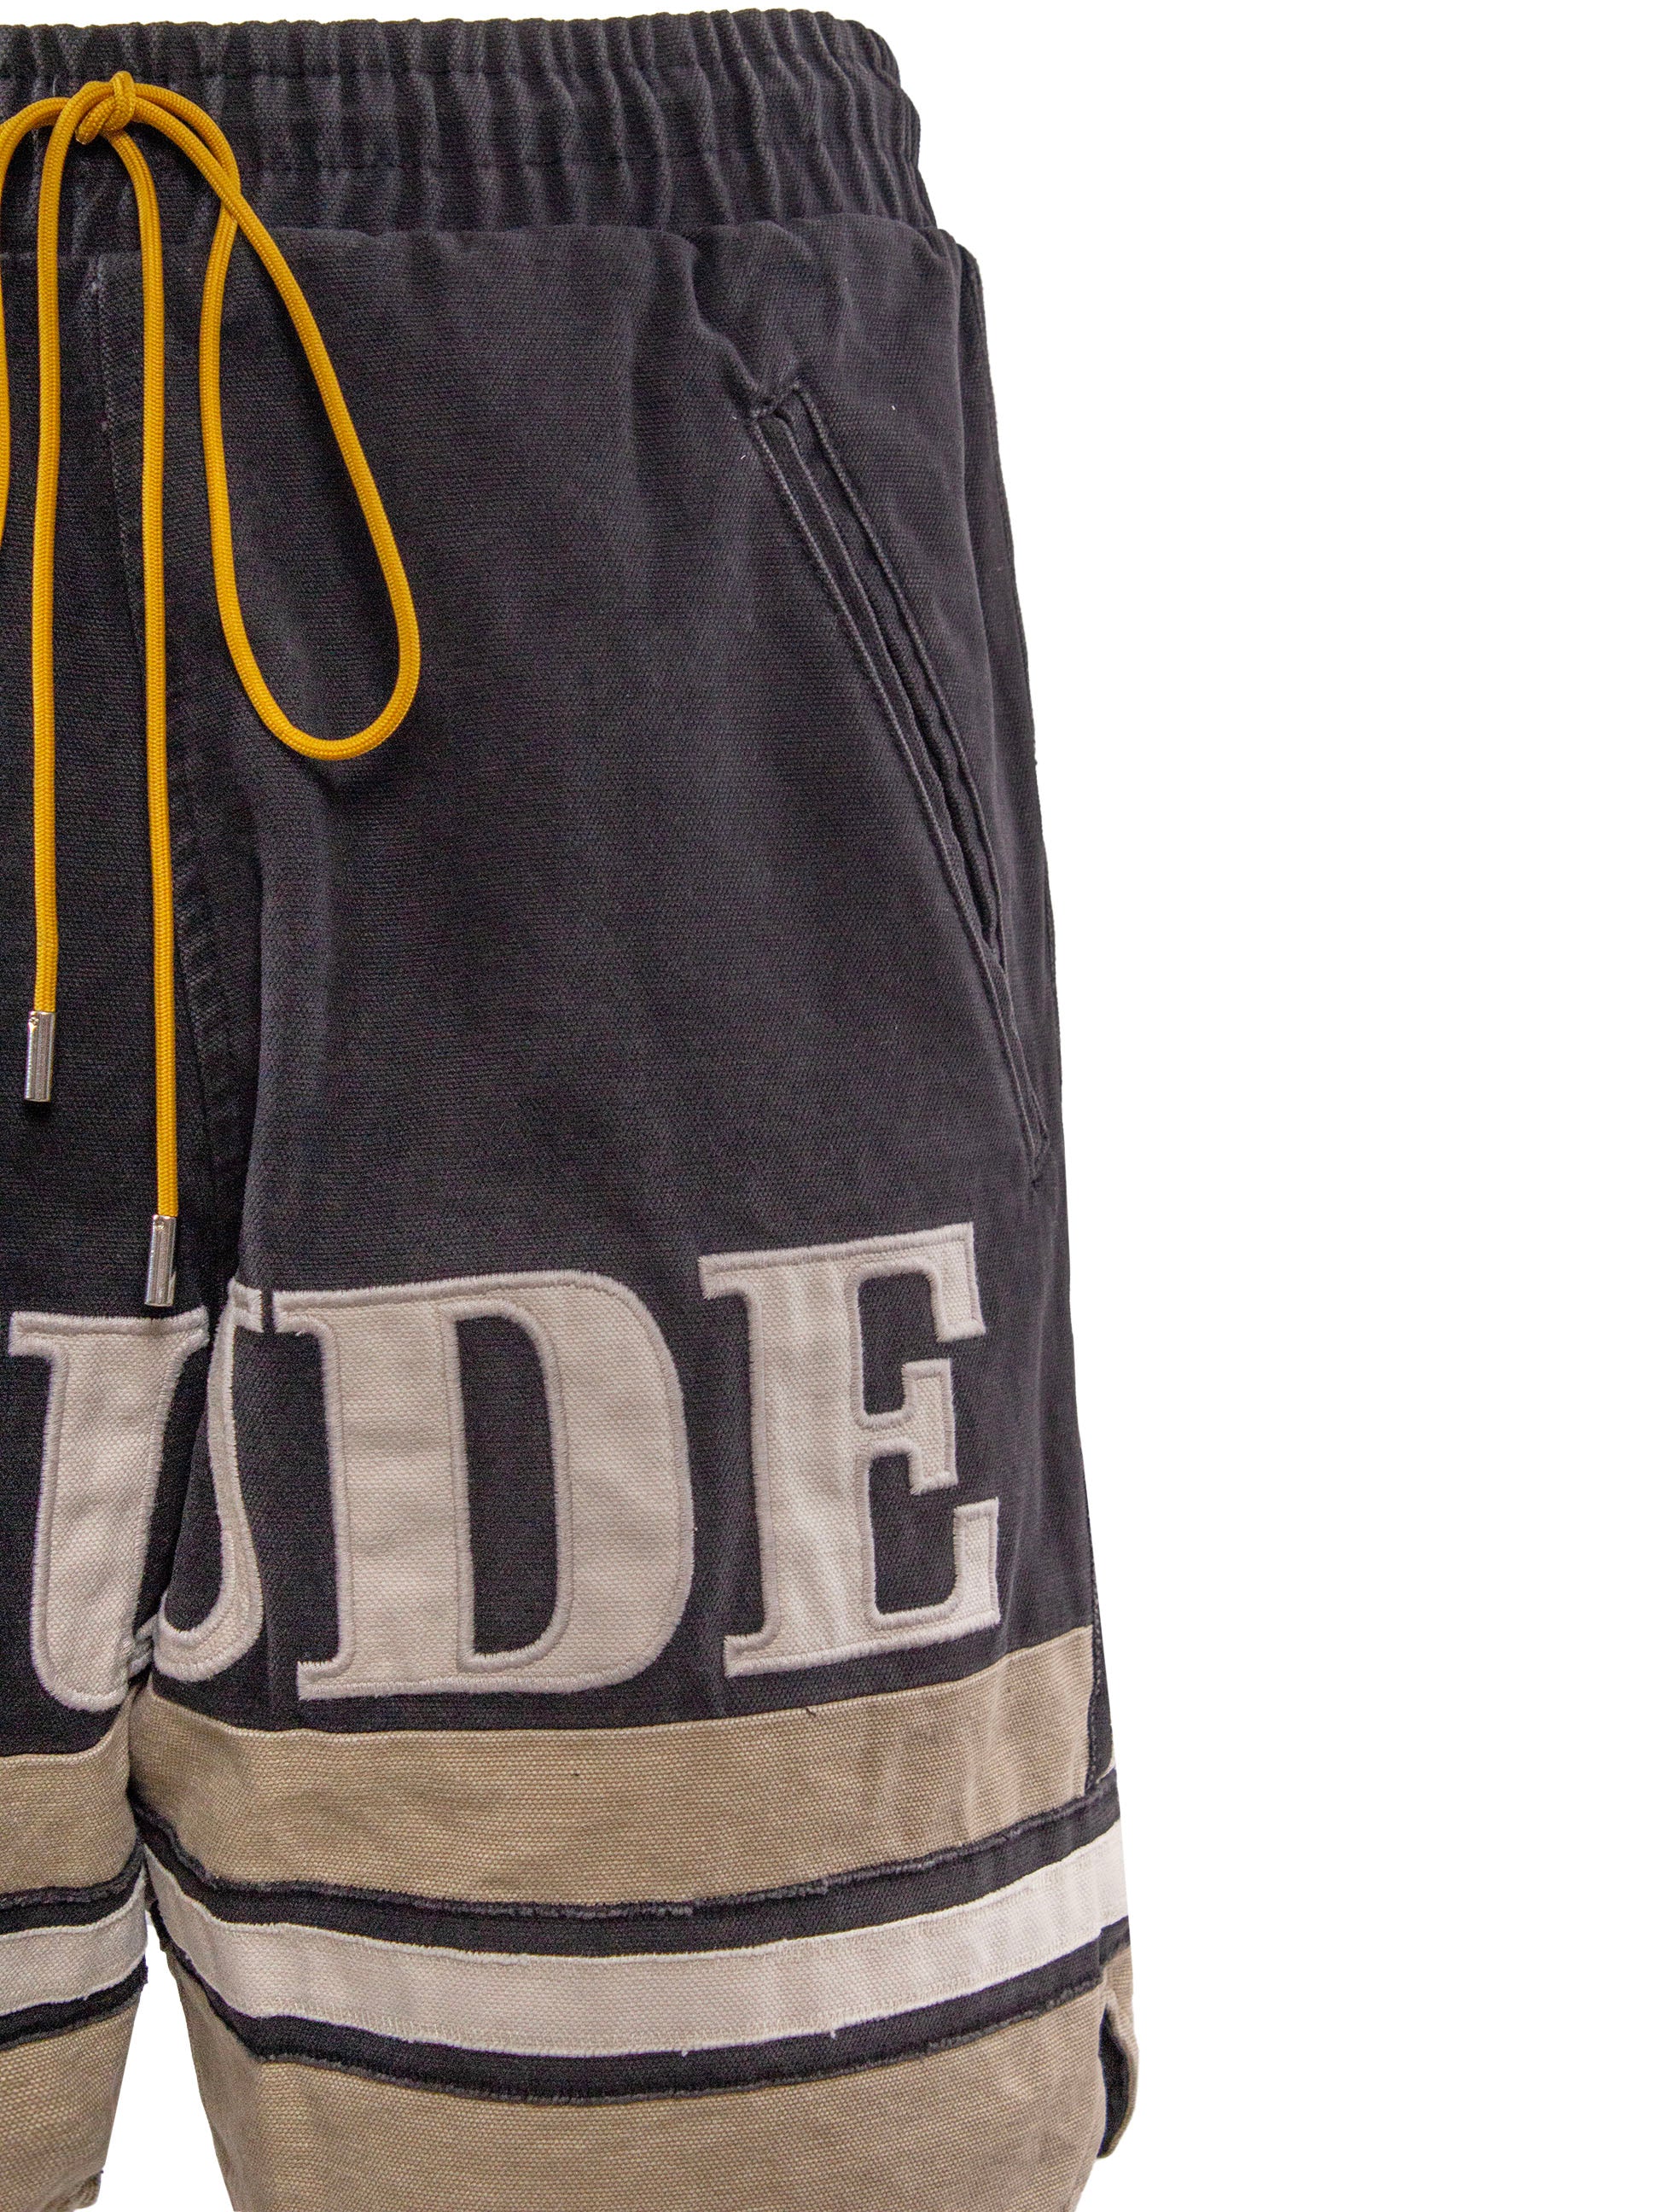 RHUDE LOGO-EMBROIDERED COTTON SHORTS